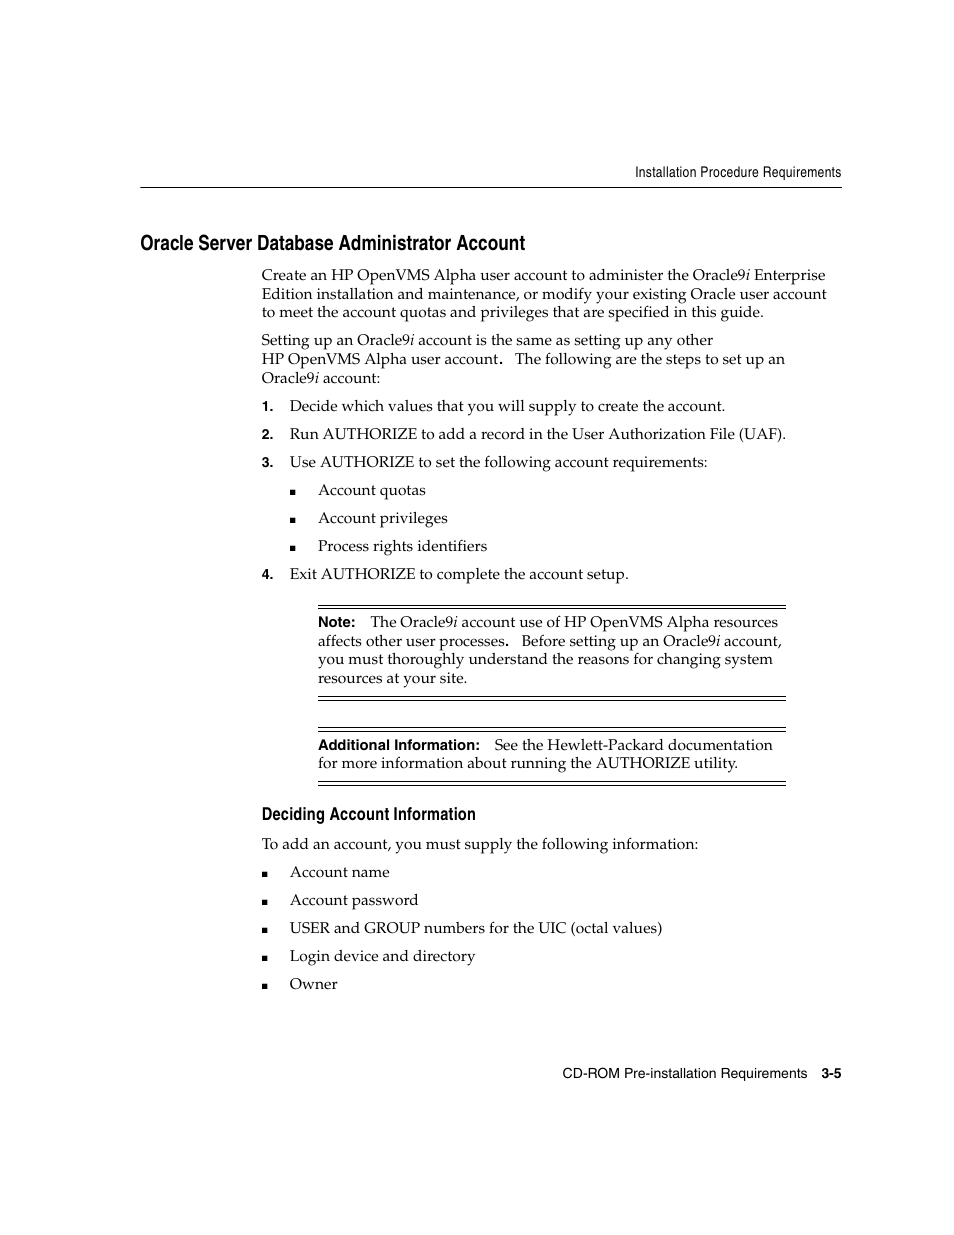 Oracle server database administrator account, Deciding account information | Oracle Audio Technologies ORACLE9I B10508-01 User Manual | Page 49 / 186